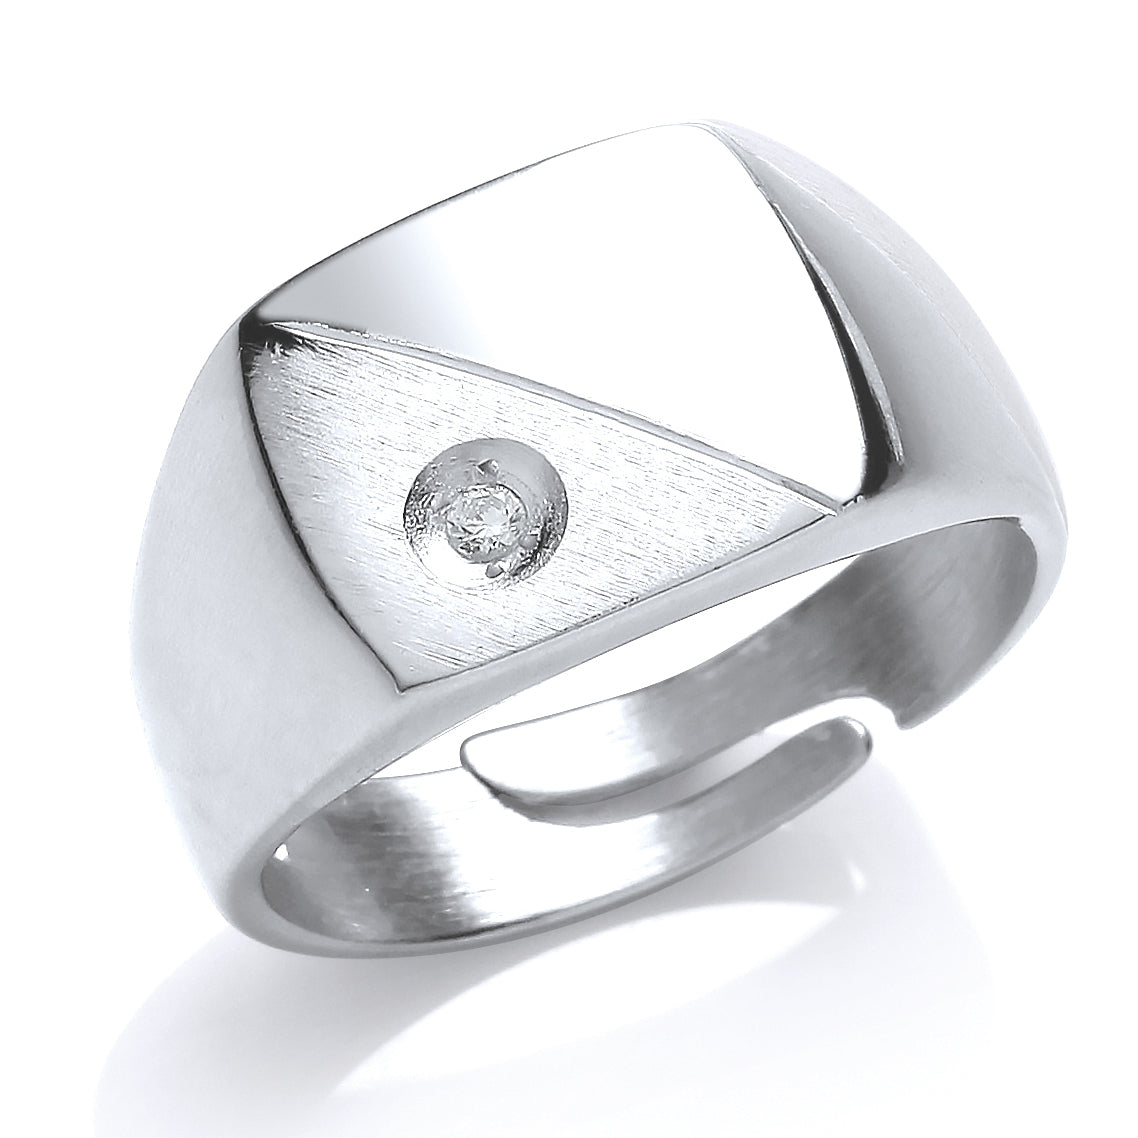 Mens Silver  CZ Square Cushion Solitaire Signet Ring - GVR652